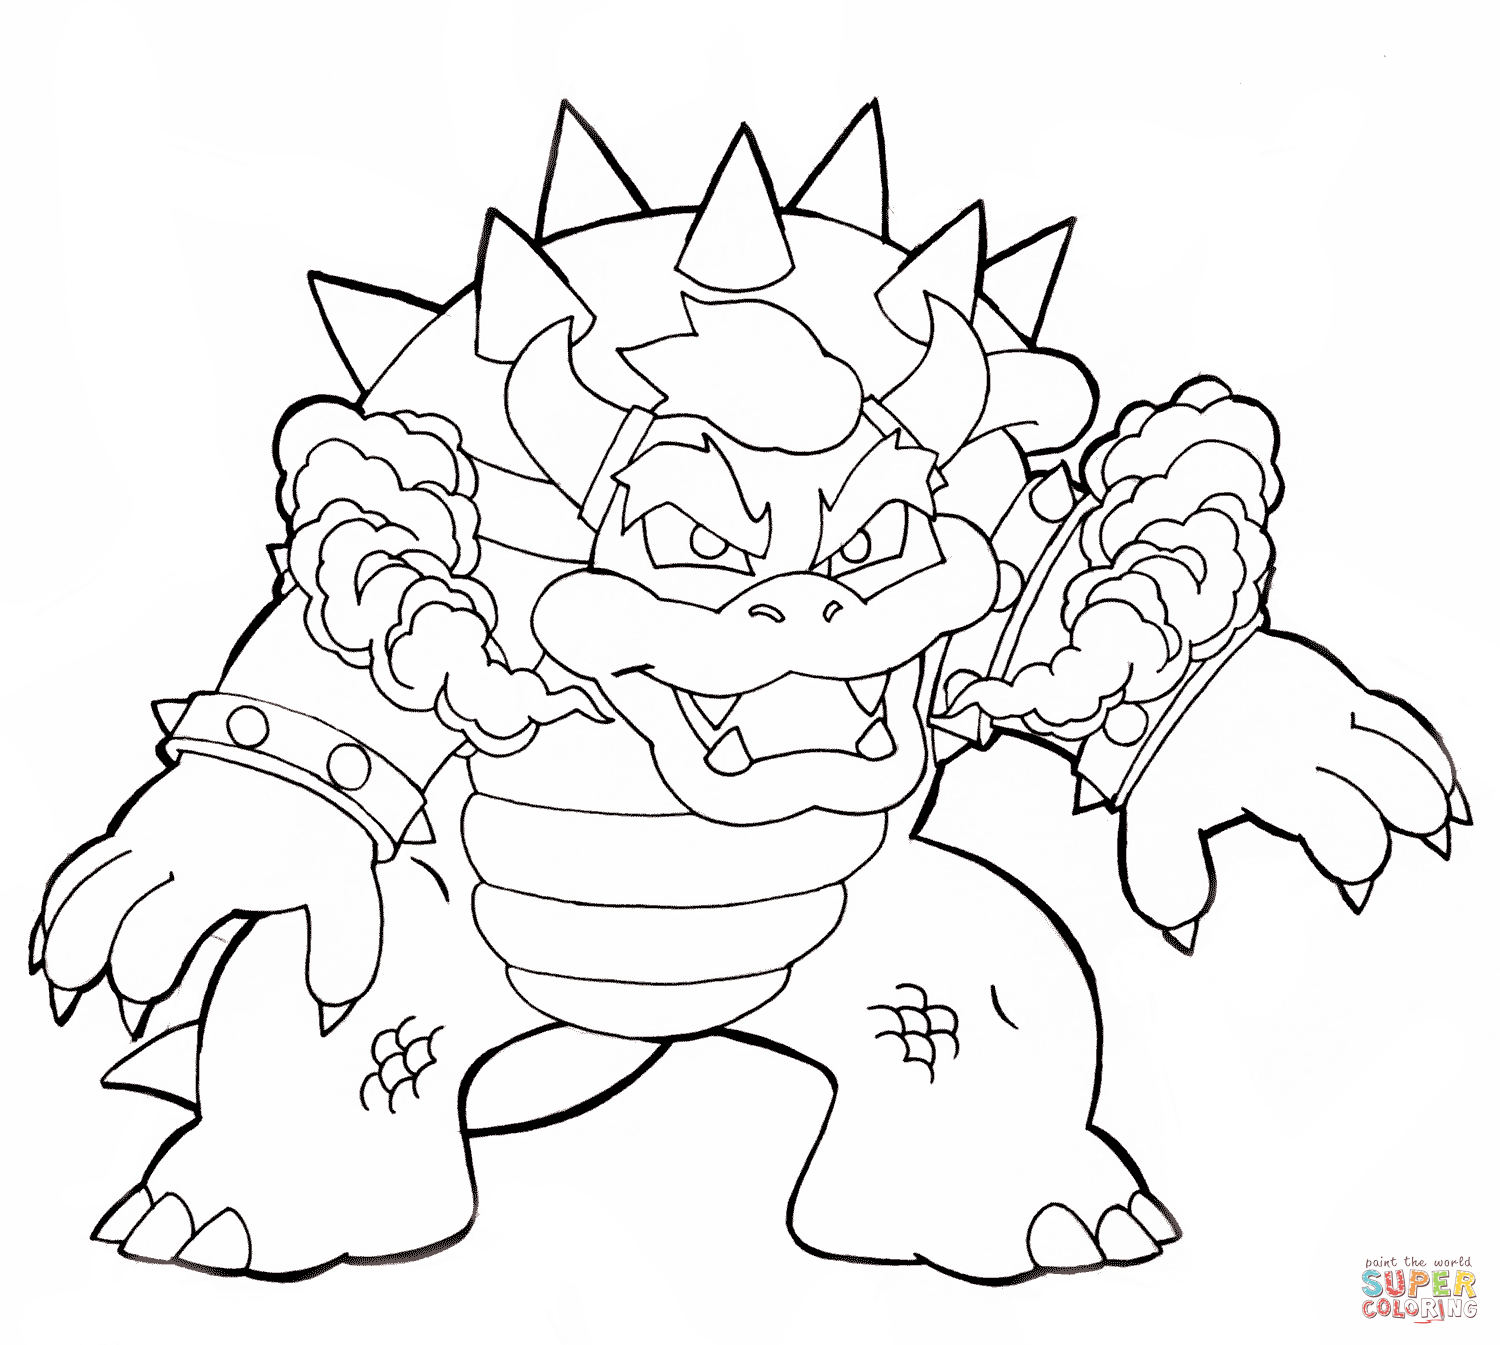 Bowser Coloring Pages Online.